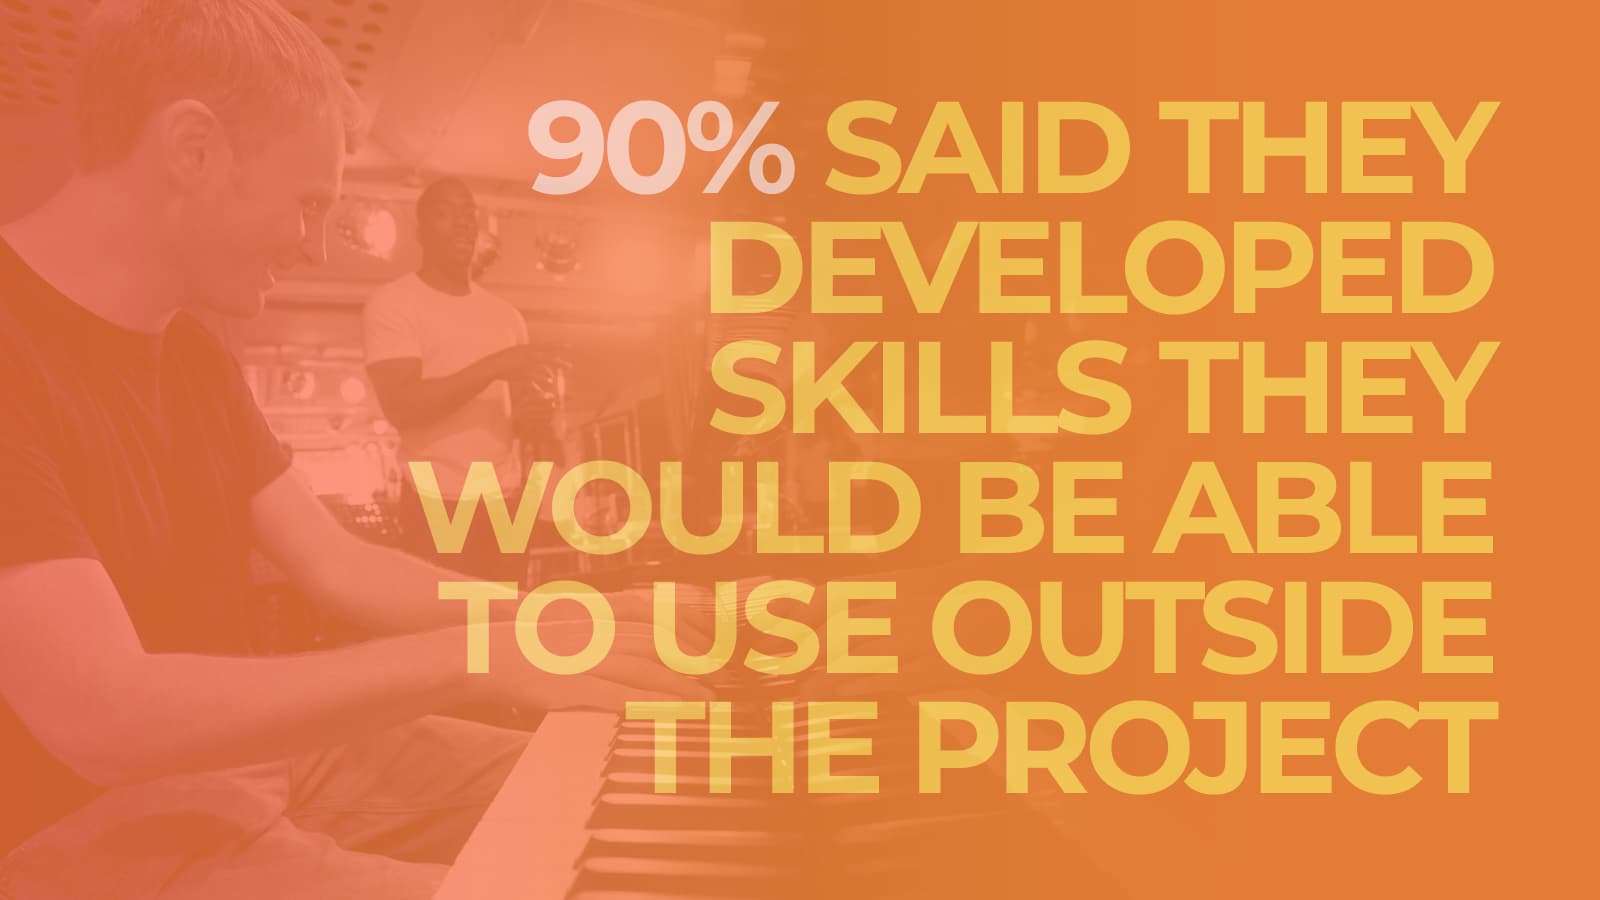 90% said they developed skills they would be able to use outside the project.